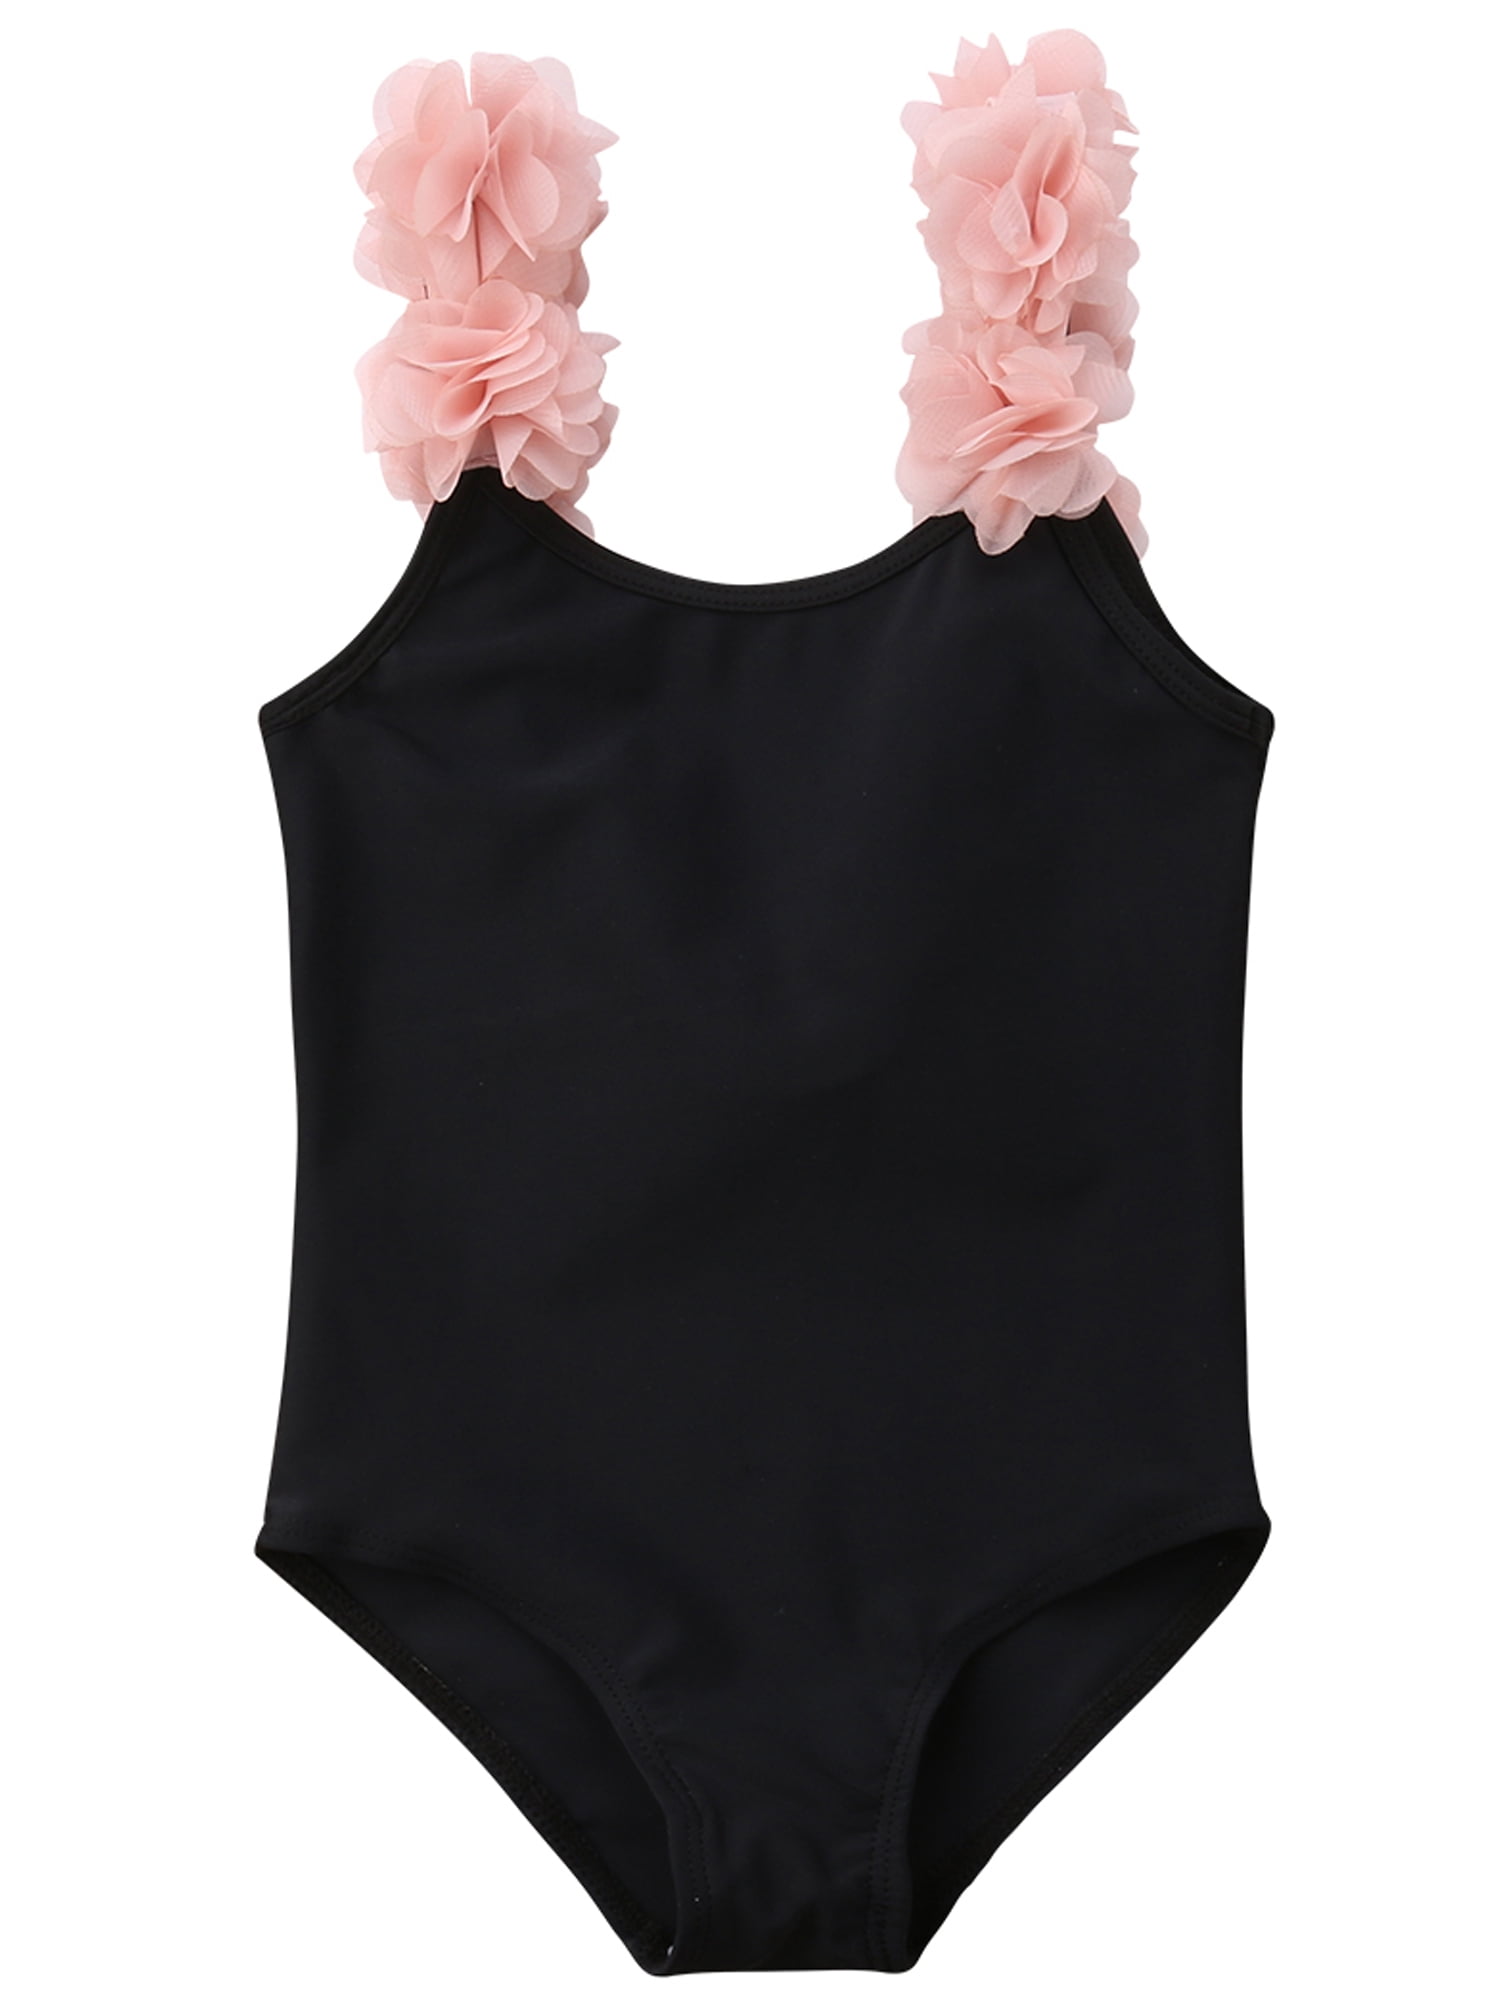 kavkas Baby Girl Swimsuit Infant Cute One Piece Bathing Suit Toddler Summer Beach Suit